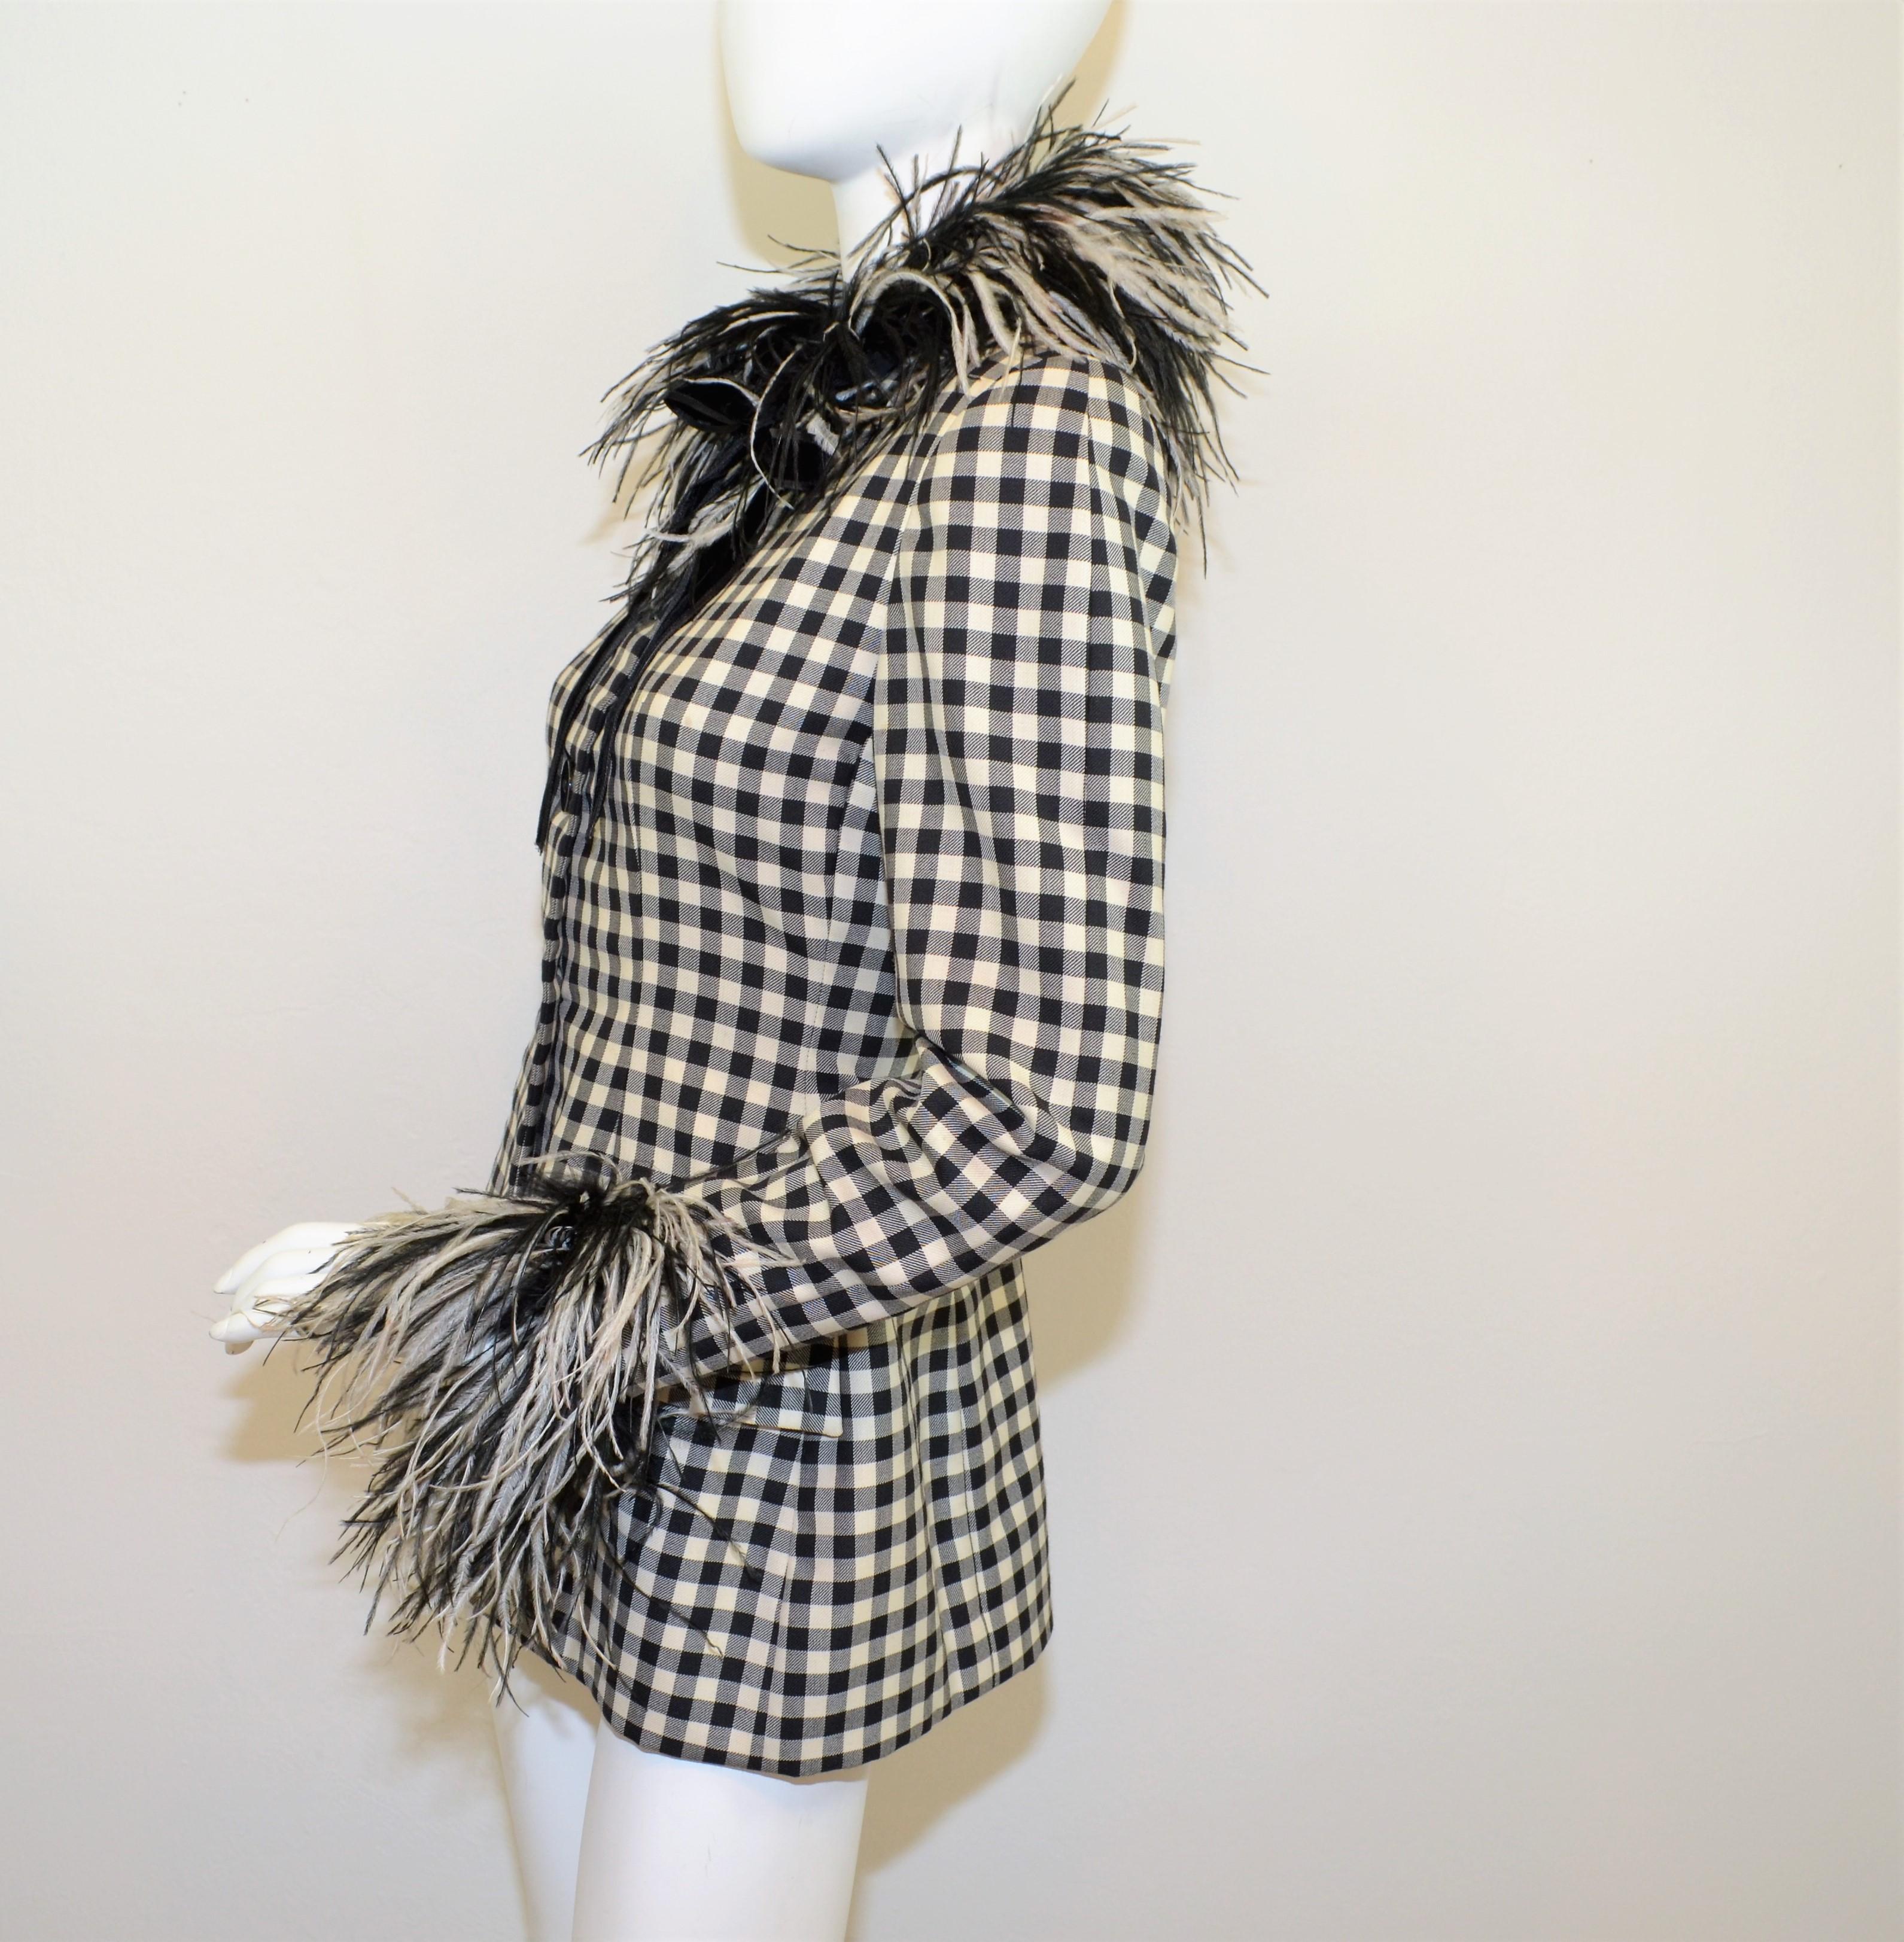 Bill Blass Vintage Jacket with Feather Collar & Cuffs -- Featured in a black and white gingham pattern with a velvet tie at the neck, maribou feather trim collar and removable cuff trimmings. Jacket has button closures at the front and is fully